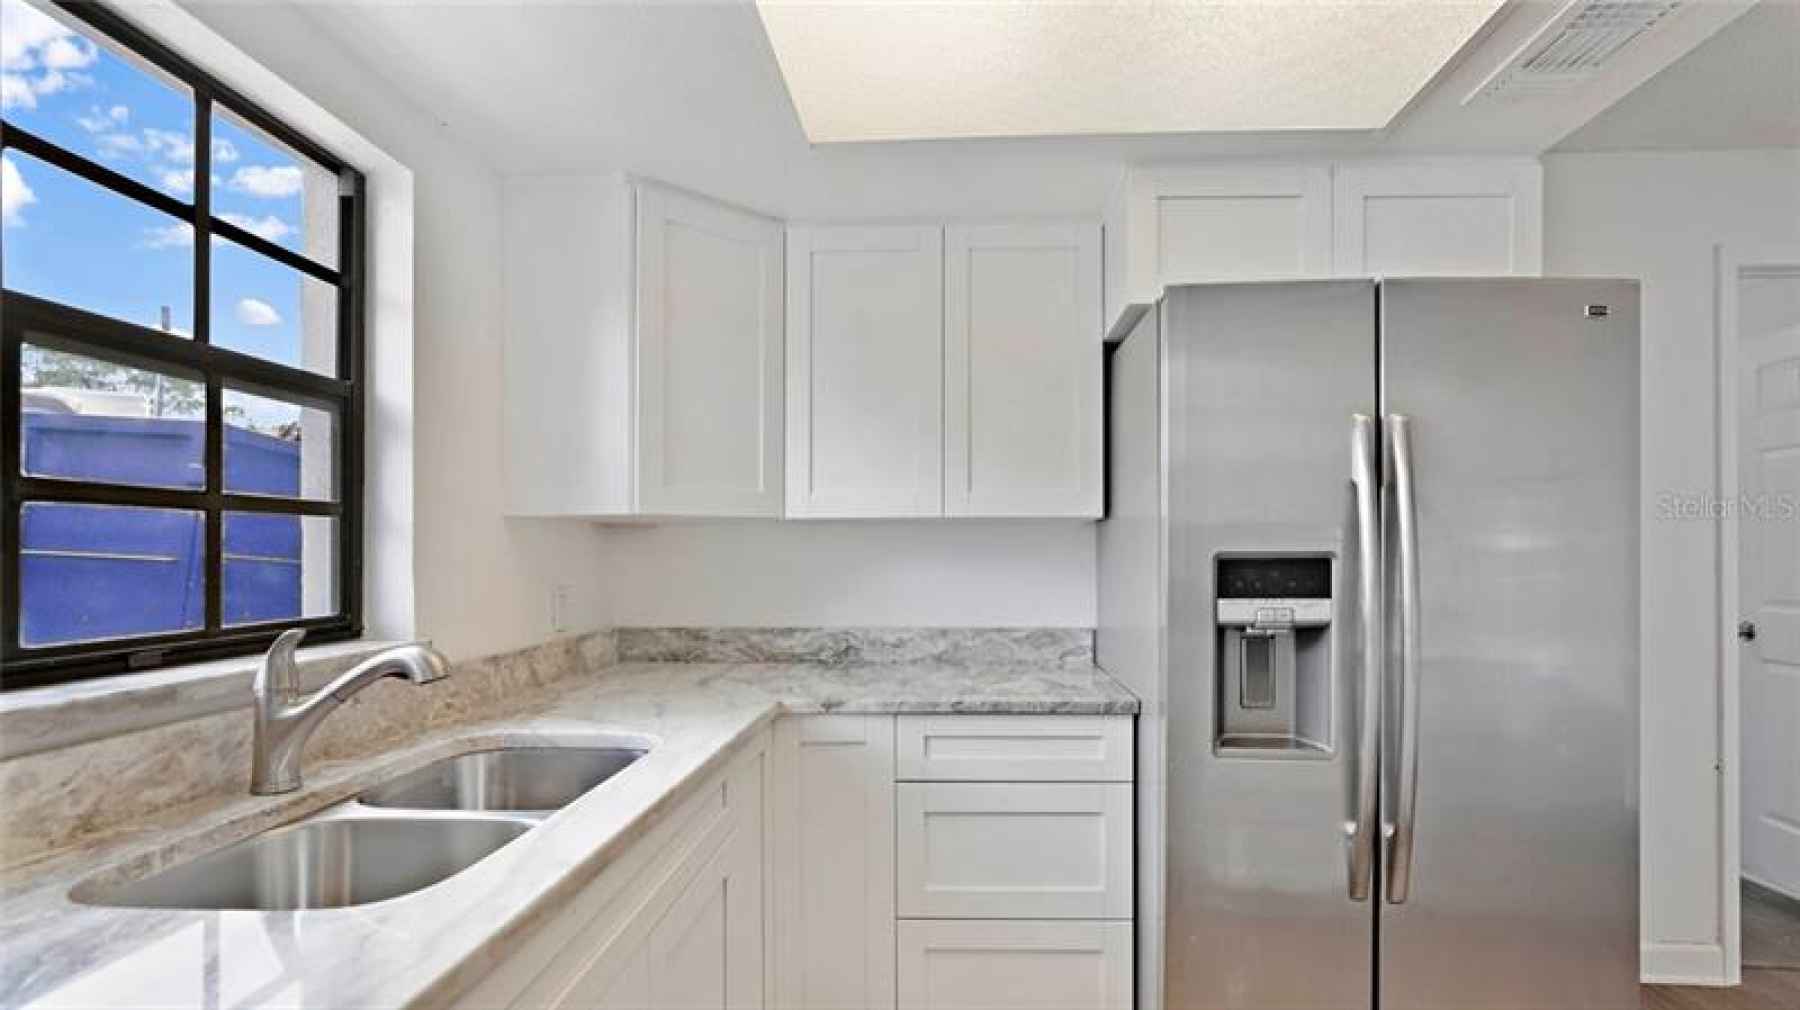 Beautifully updated kitchen with granite counters.